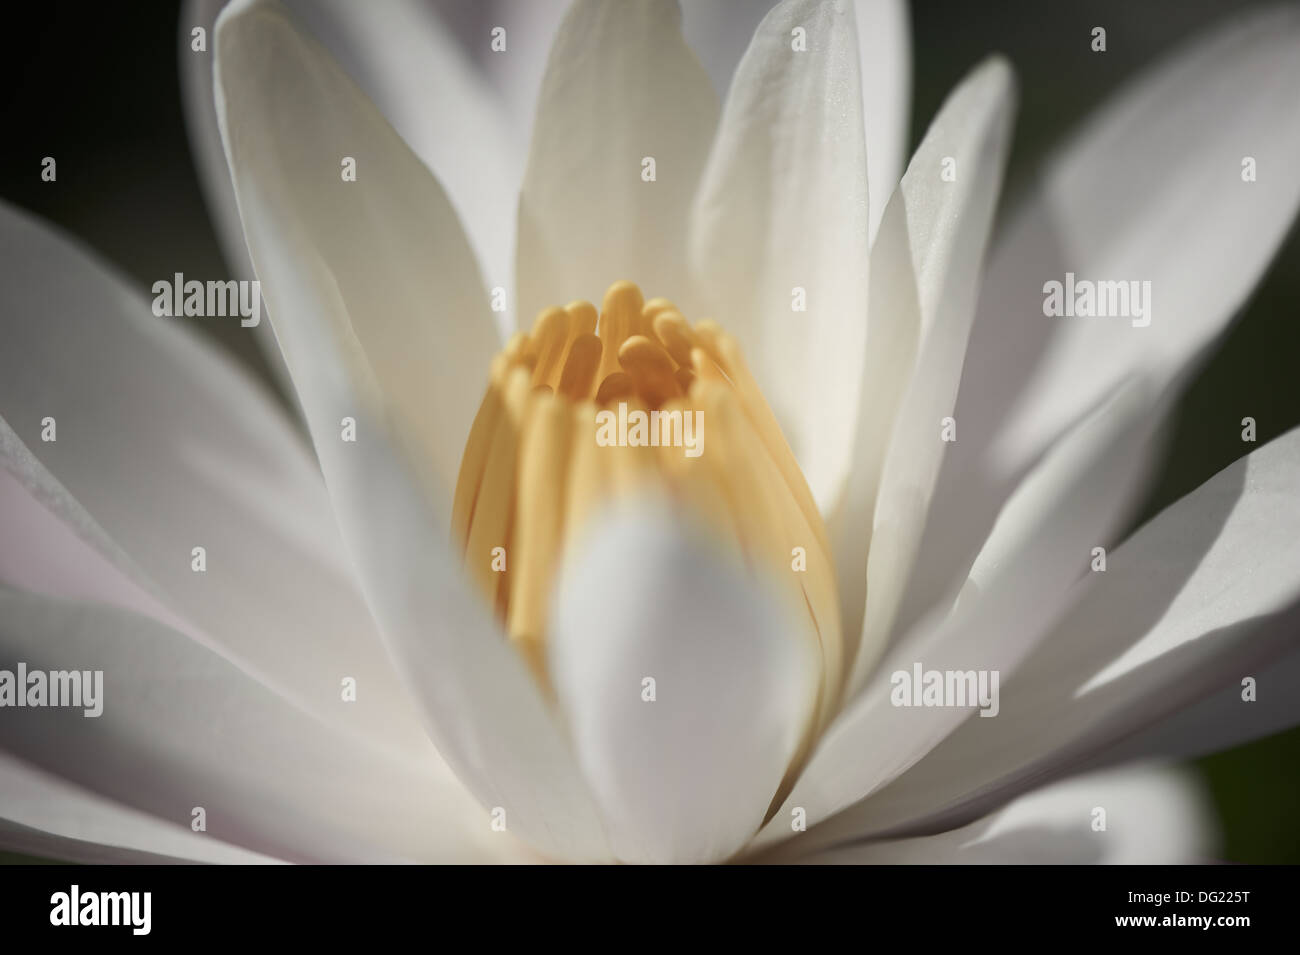 Water lilies Stock Photo